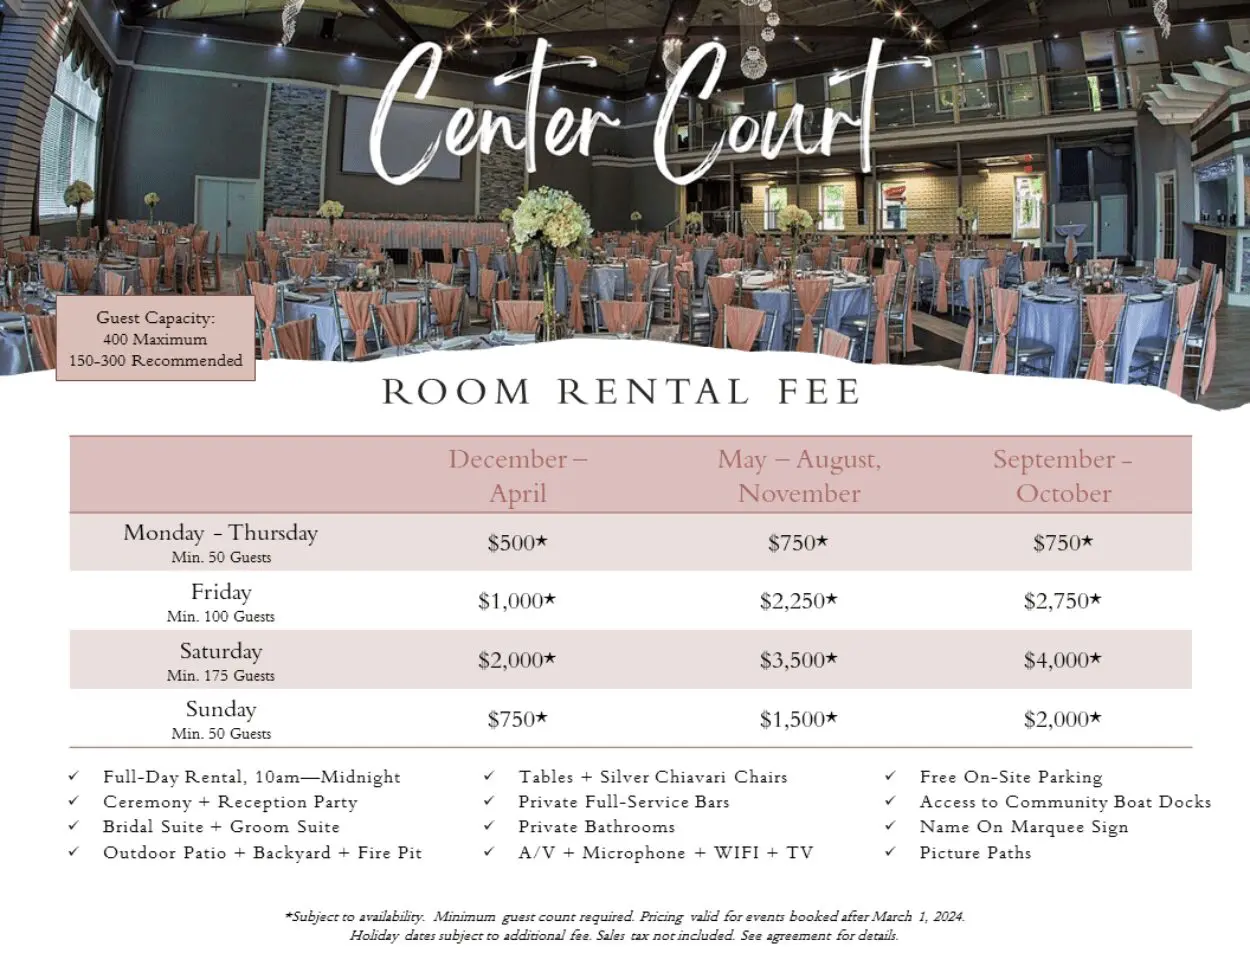 A room rental fee for the center court.